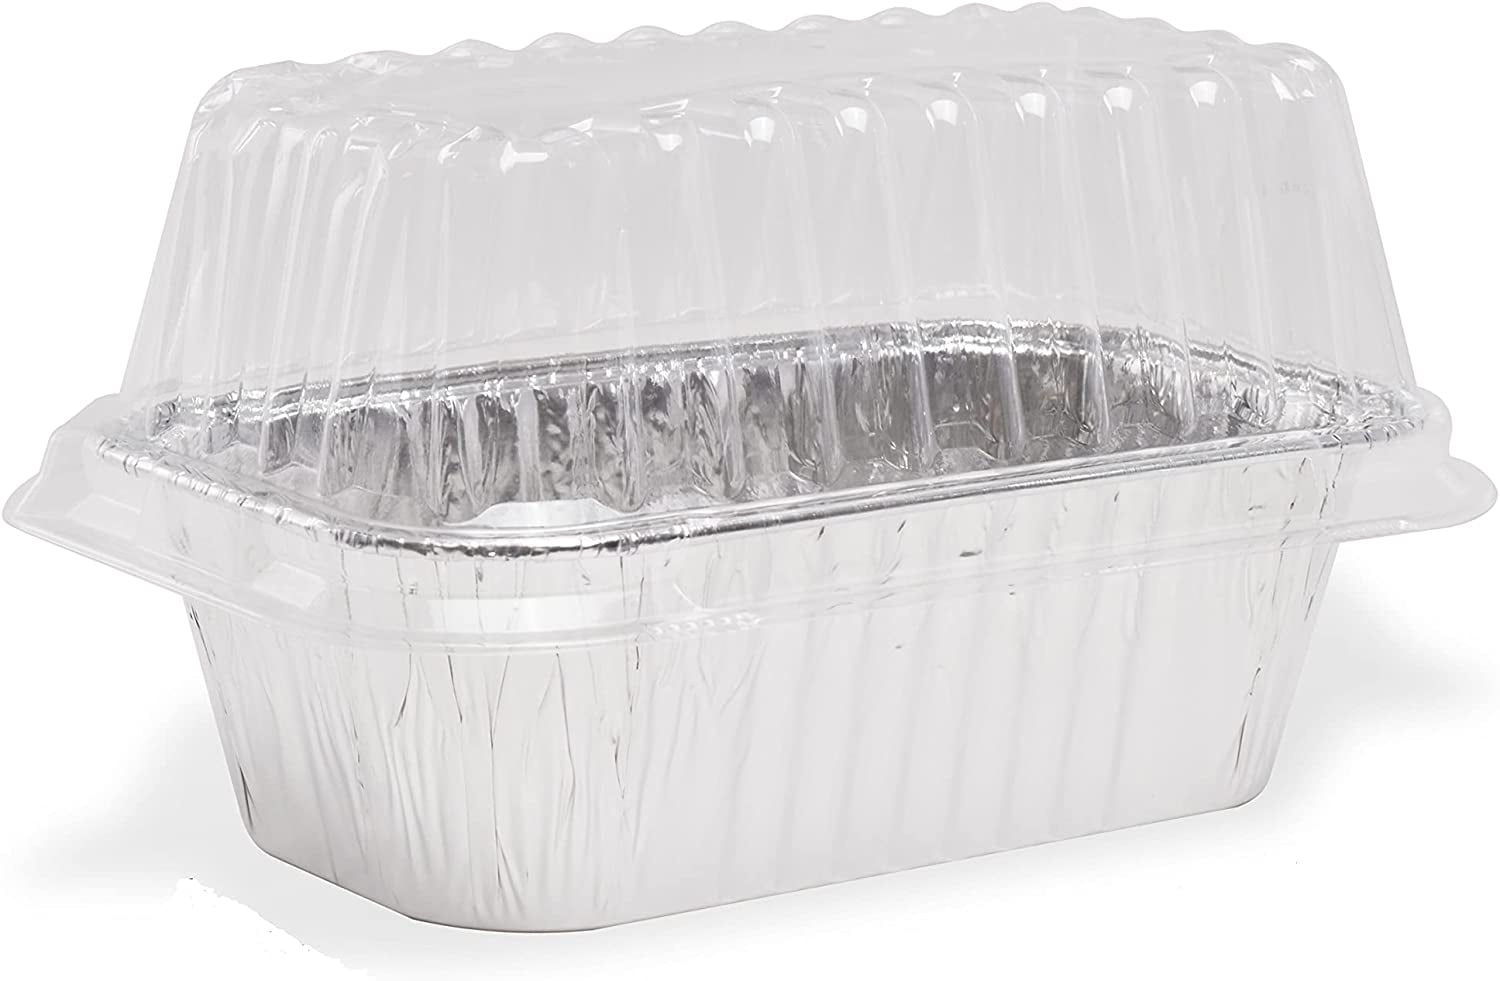 Aluminum Foil Mini-Loaf Pan w/Clear Dome Lid 25/PK 1 lb Disposable Containers 